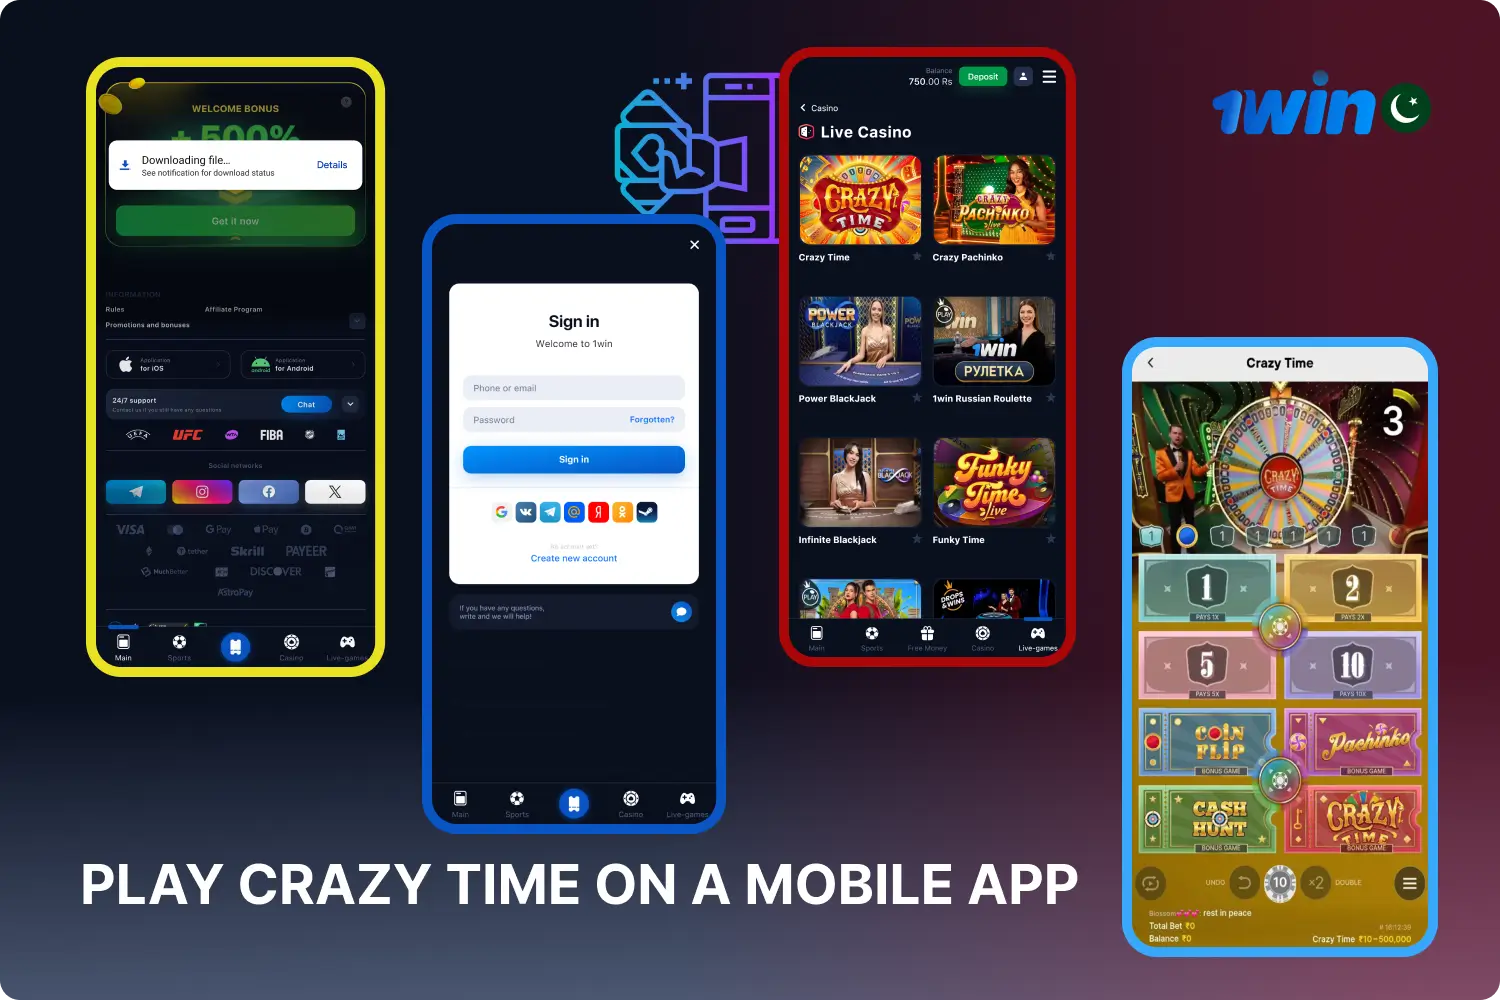 Pakistani gamblers can comfortably play Crazy Time on the 1win mobile app for Android or iOS